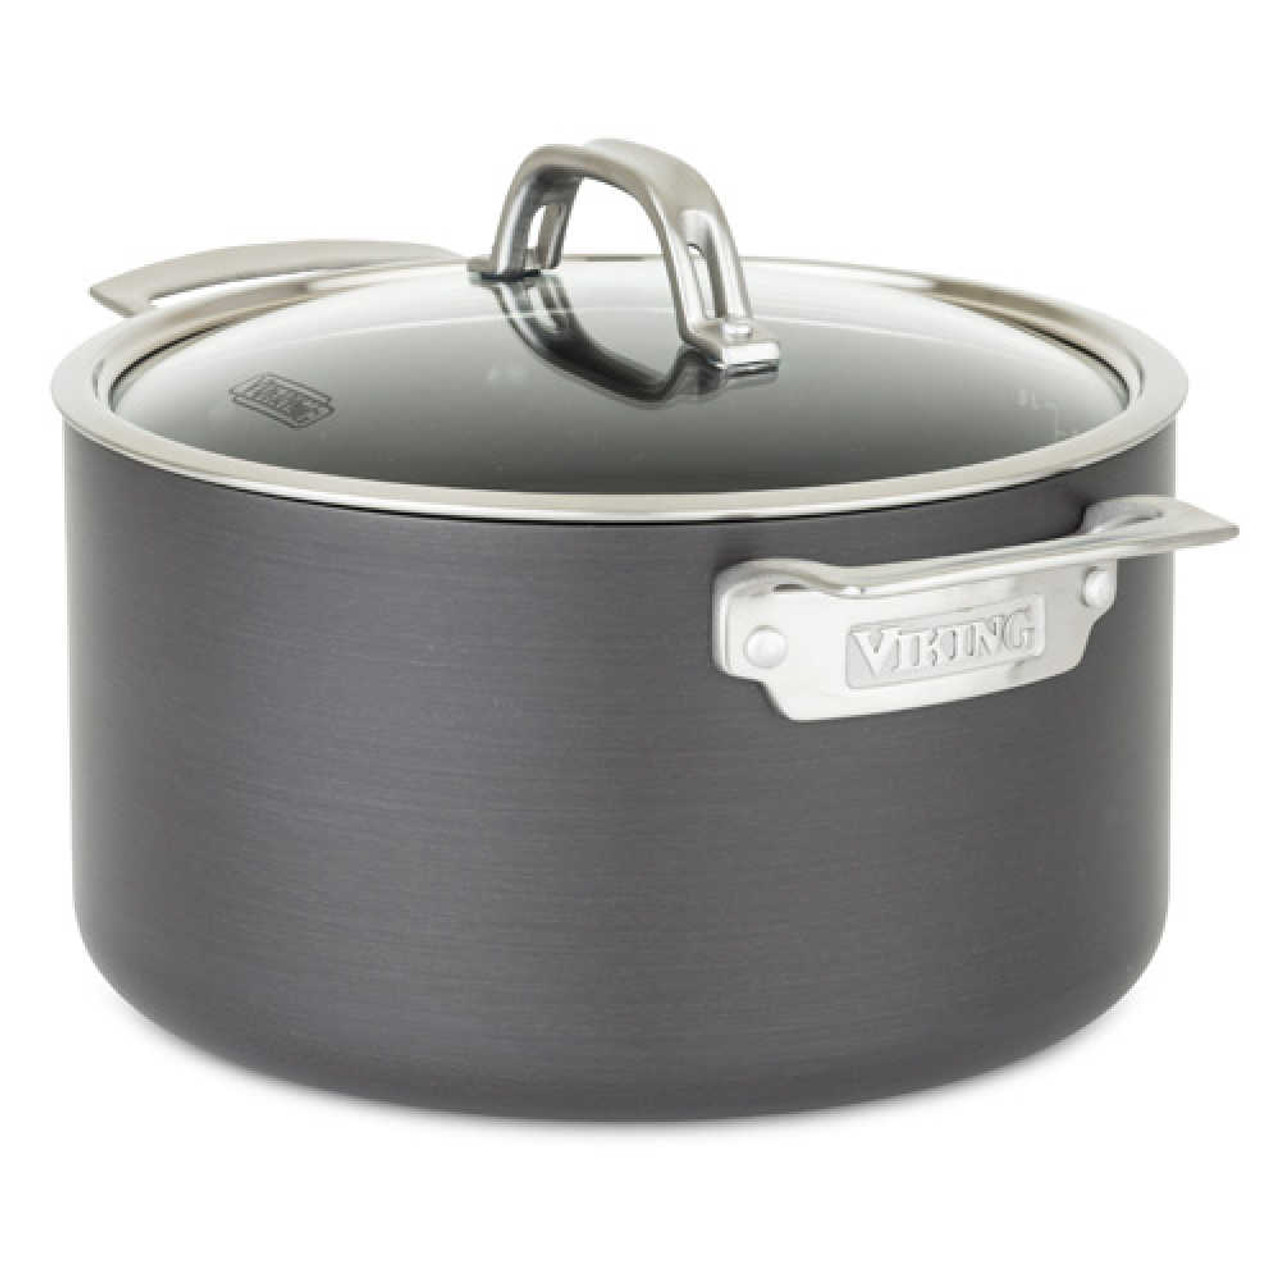 https://cdn11.bigcommerce.com/s-hccytny0od/images/stencil/1280x1280/products/4819/19679/Viking_Hard_Anodized_Nonstick_Dutch_Oven__87482.1656108261.jpg?c=2?imbypass=on